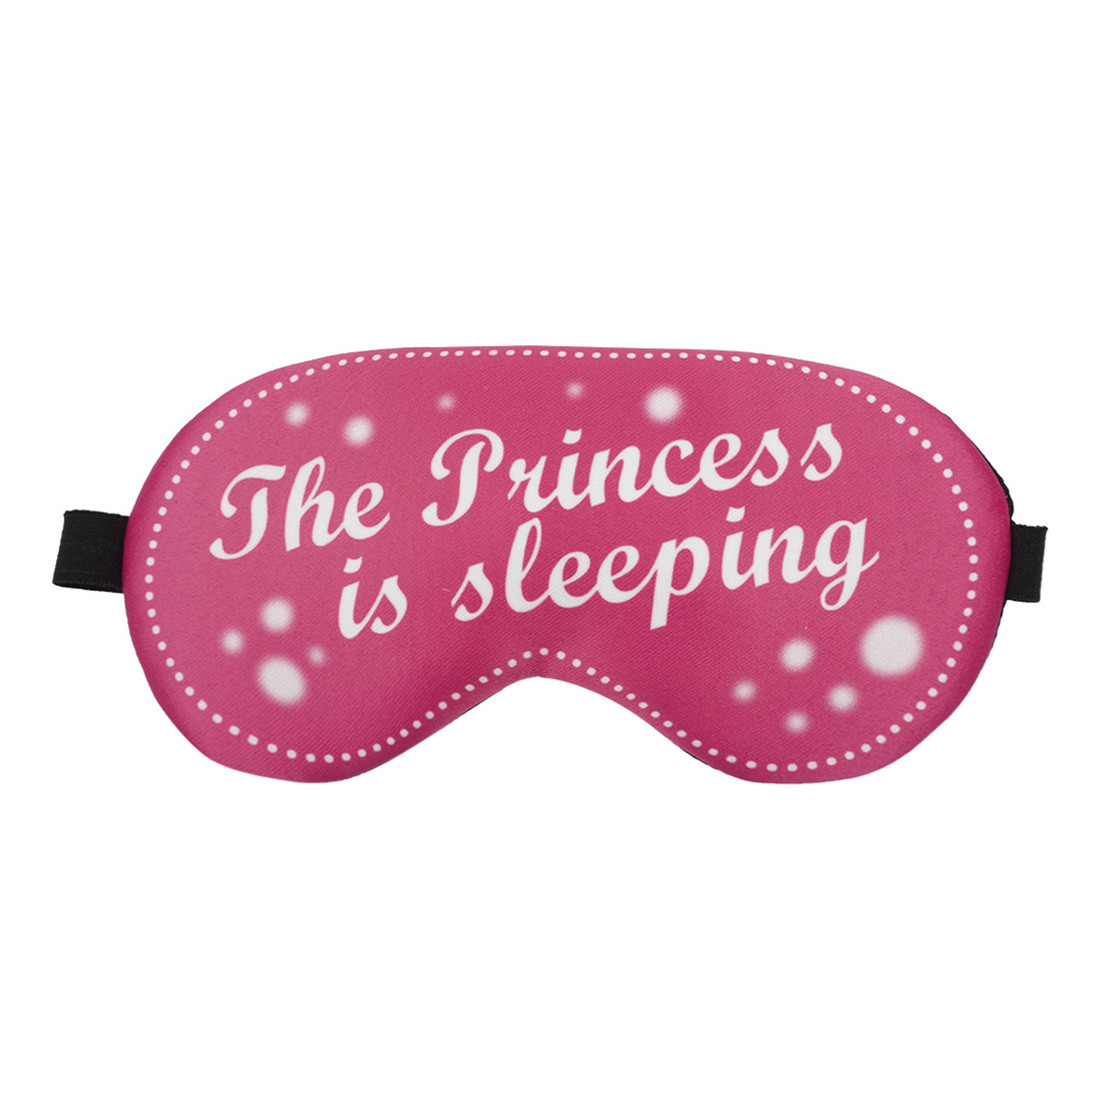 Crazy Corner The Princess Is Sleeping Eye Mask/Printed Eye Mask/Sleeping Mask/Travel Eyemask/Eye Mask For Girl/Eye Mask For Women (7.5 x 4 Inches)